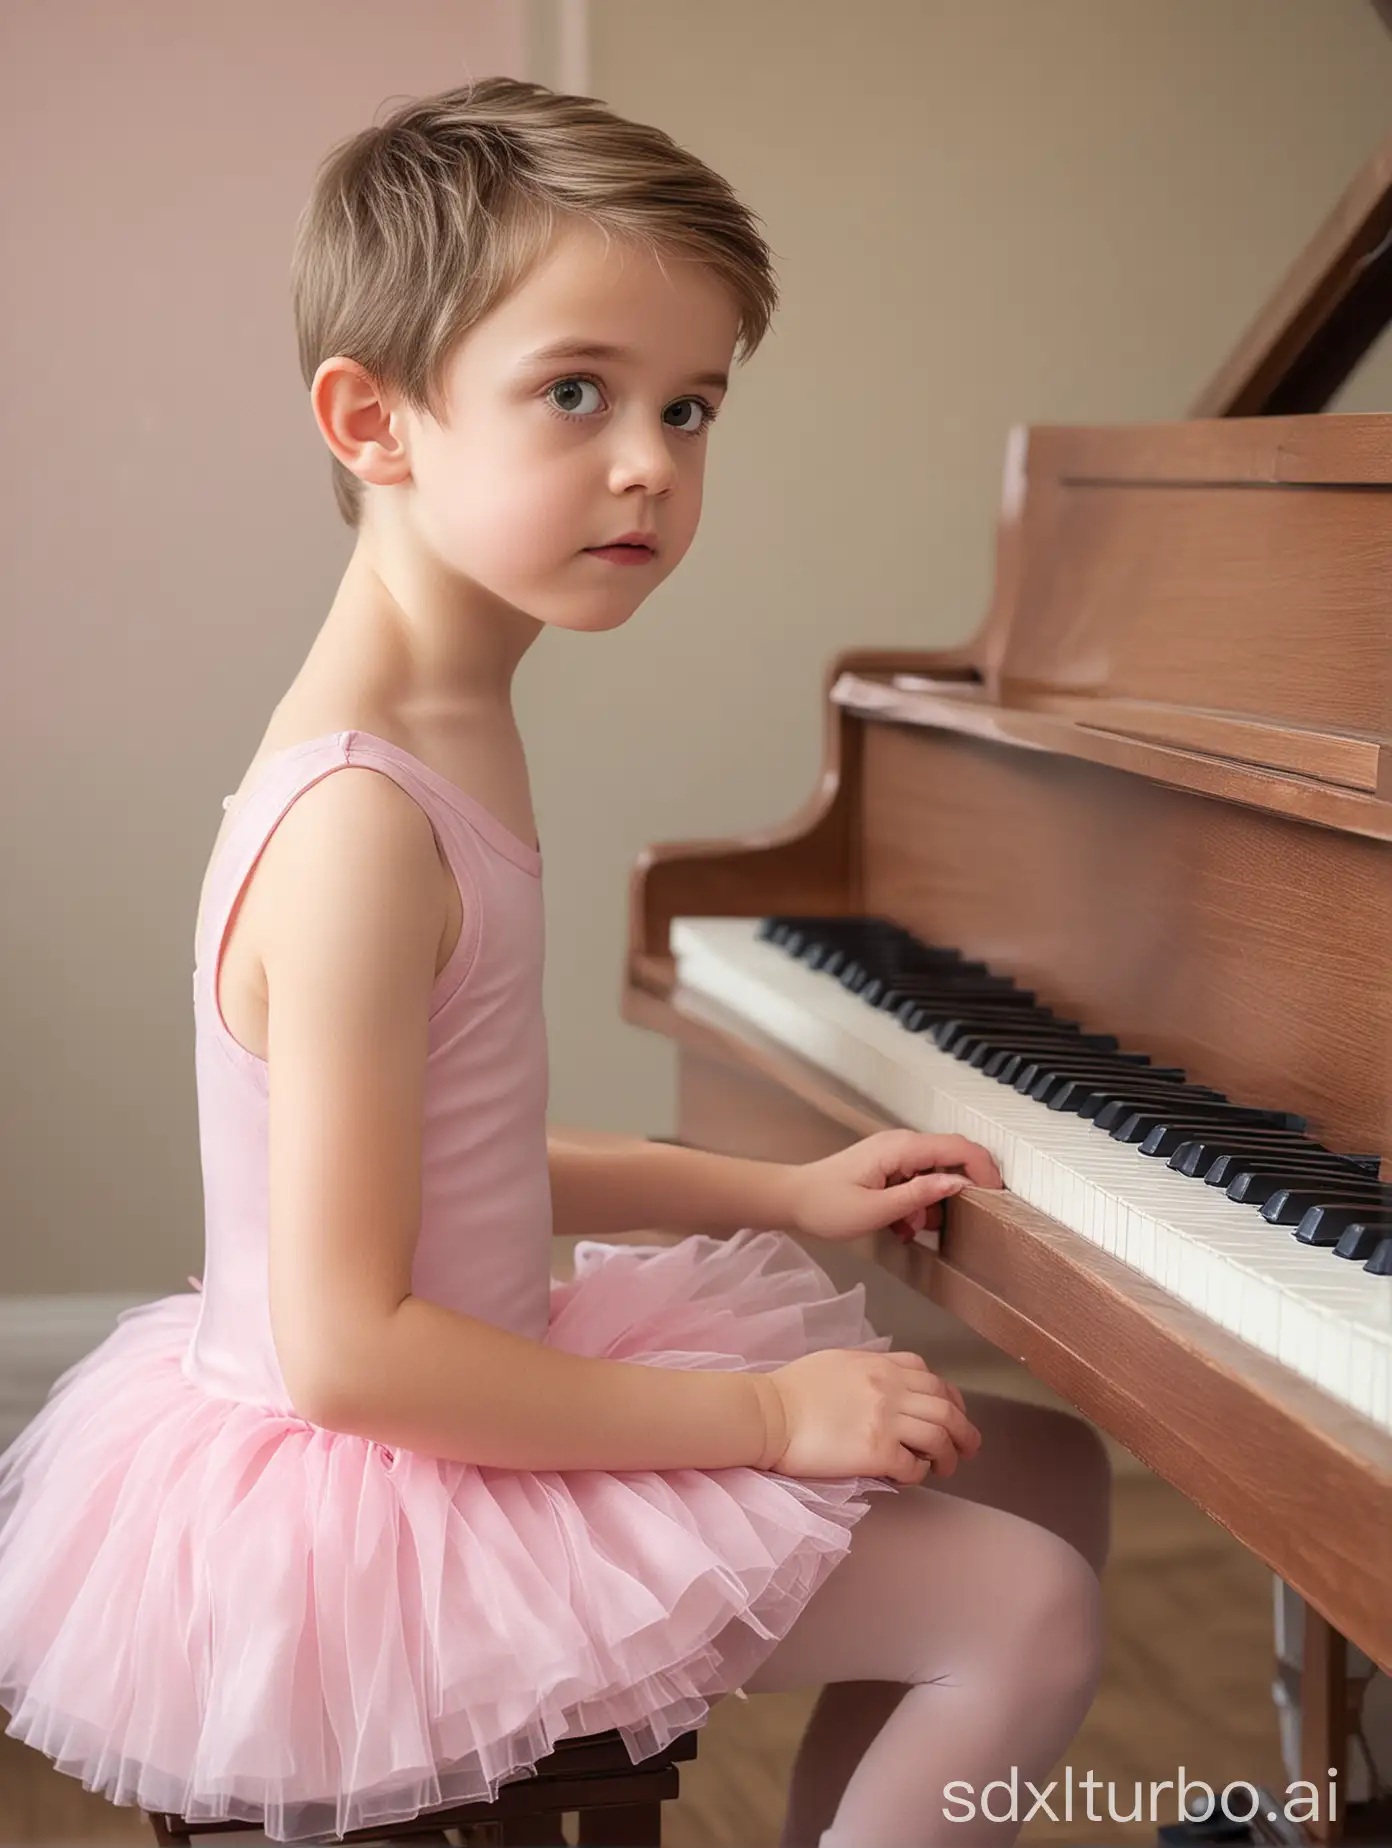 Nervously-Cute-Boy-in-Pink-Ballet-Dress-Playing-Piano-Gender-Role-Reversal-Digital-Photography